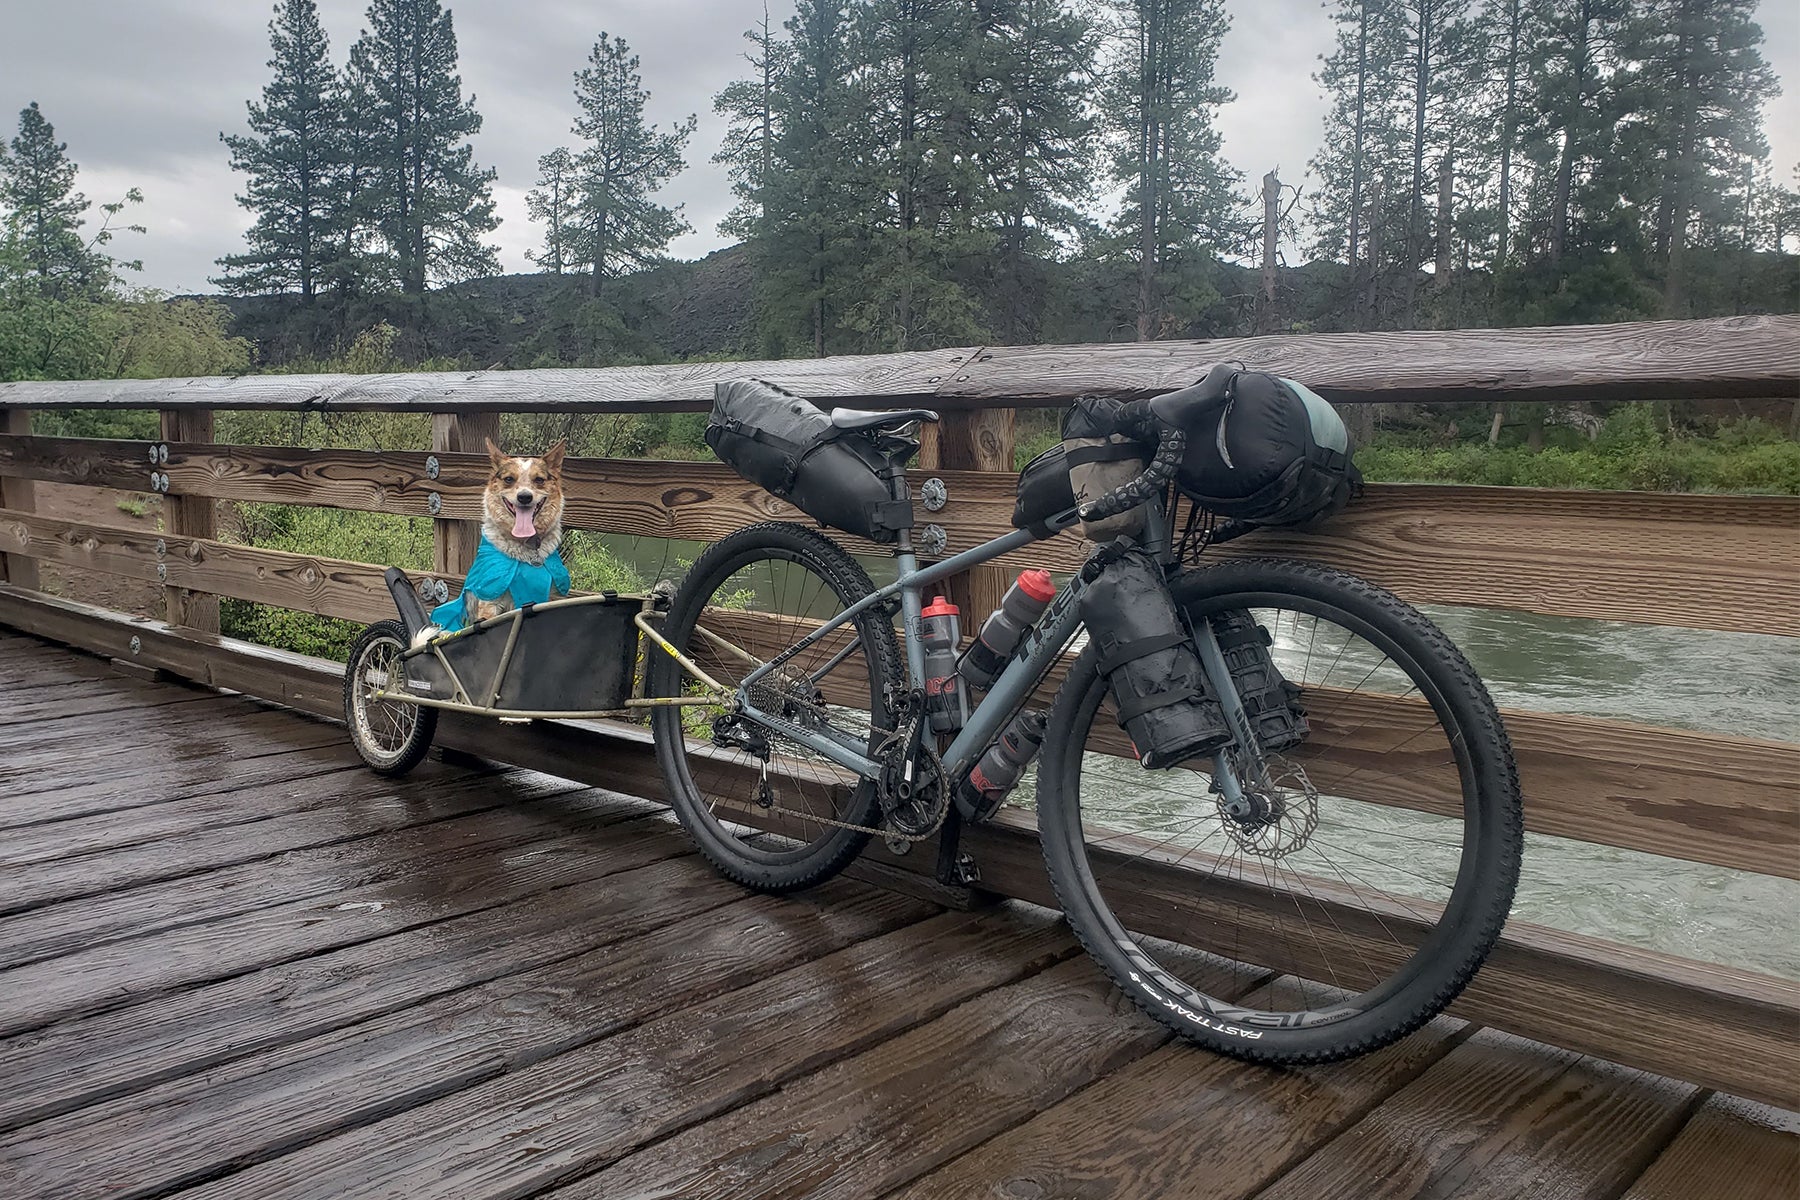 Emma in the trailer behind the gravel bike loaded up for bikepacking on a wood bridge in Central Oregon.